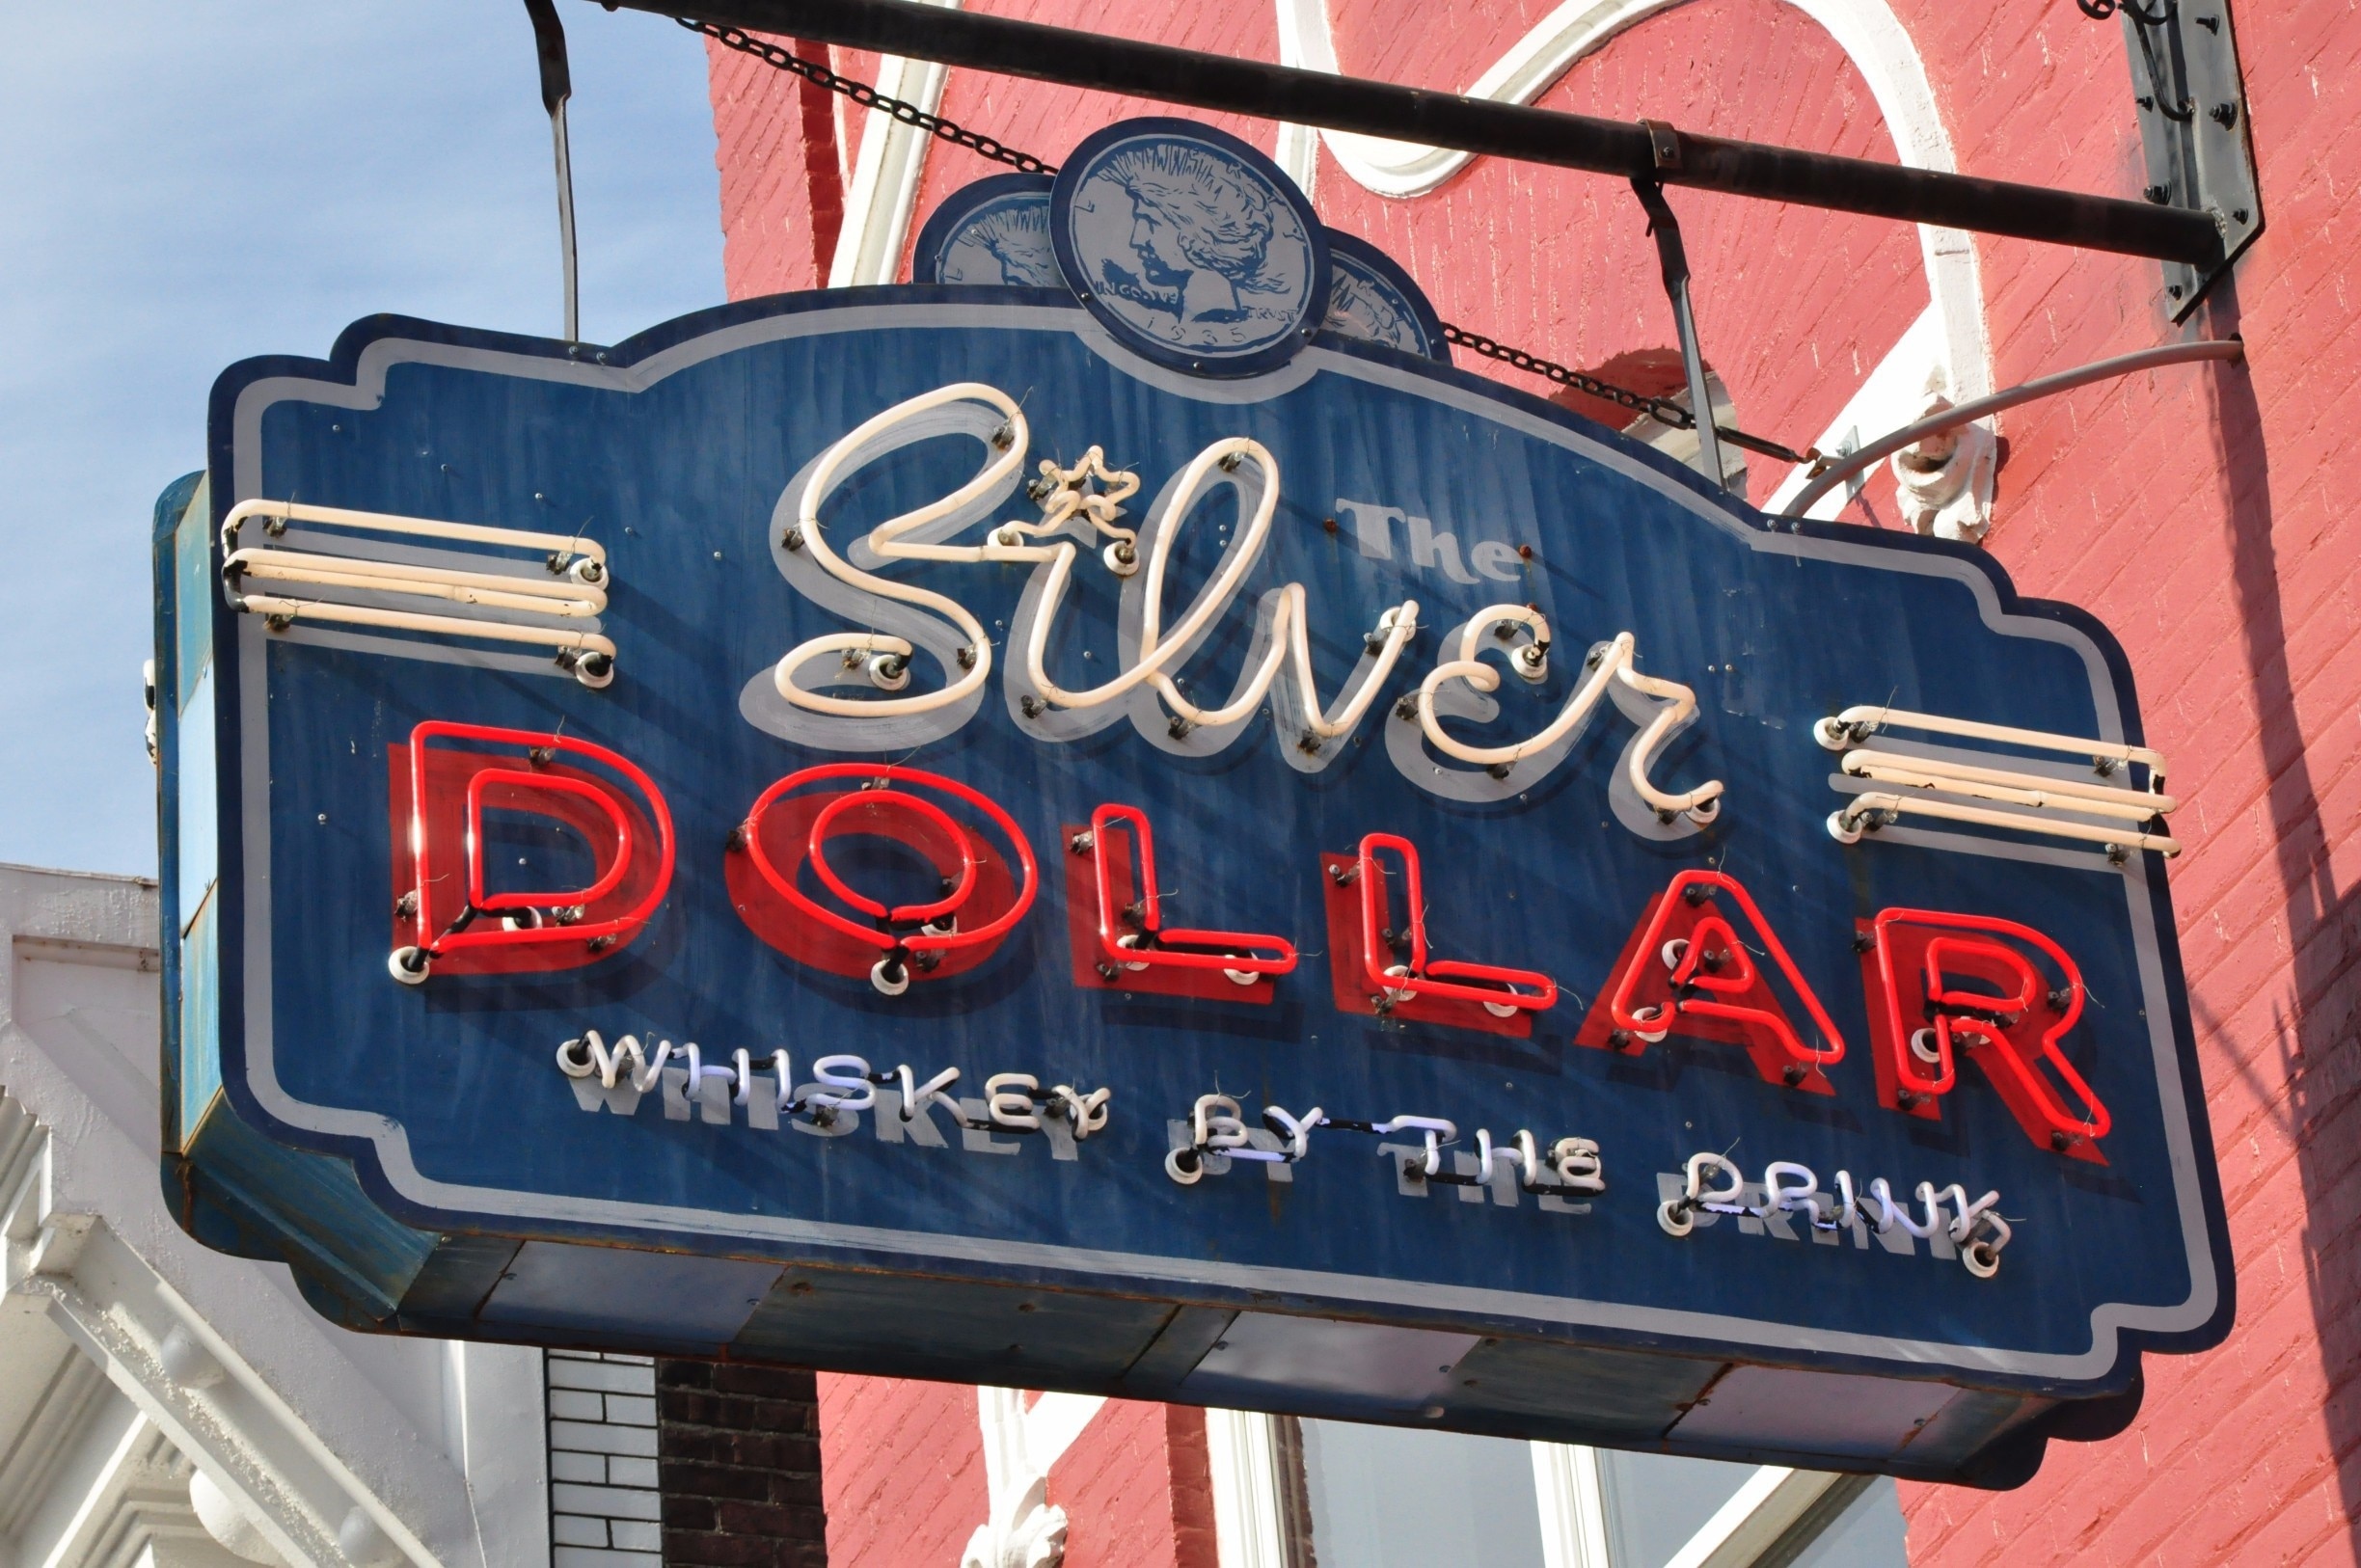 So the question is: " Why would anybody go to a "fast food" place to eat?" It is really easy to find real food in real places anywhere. Get there. Silver Dollar was good by the way.